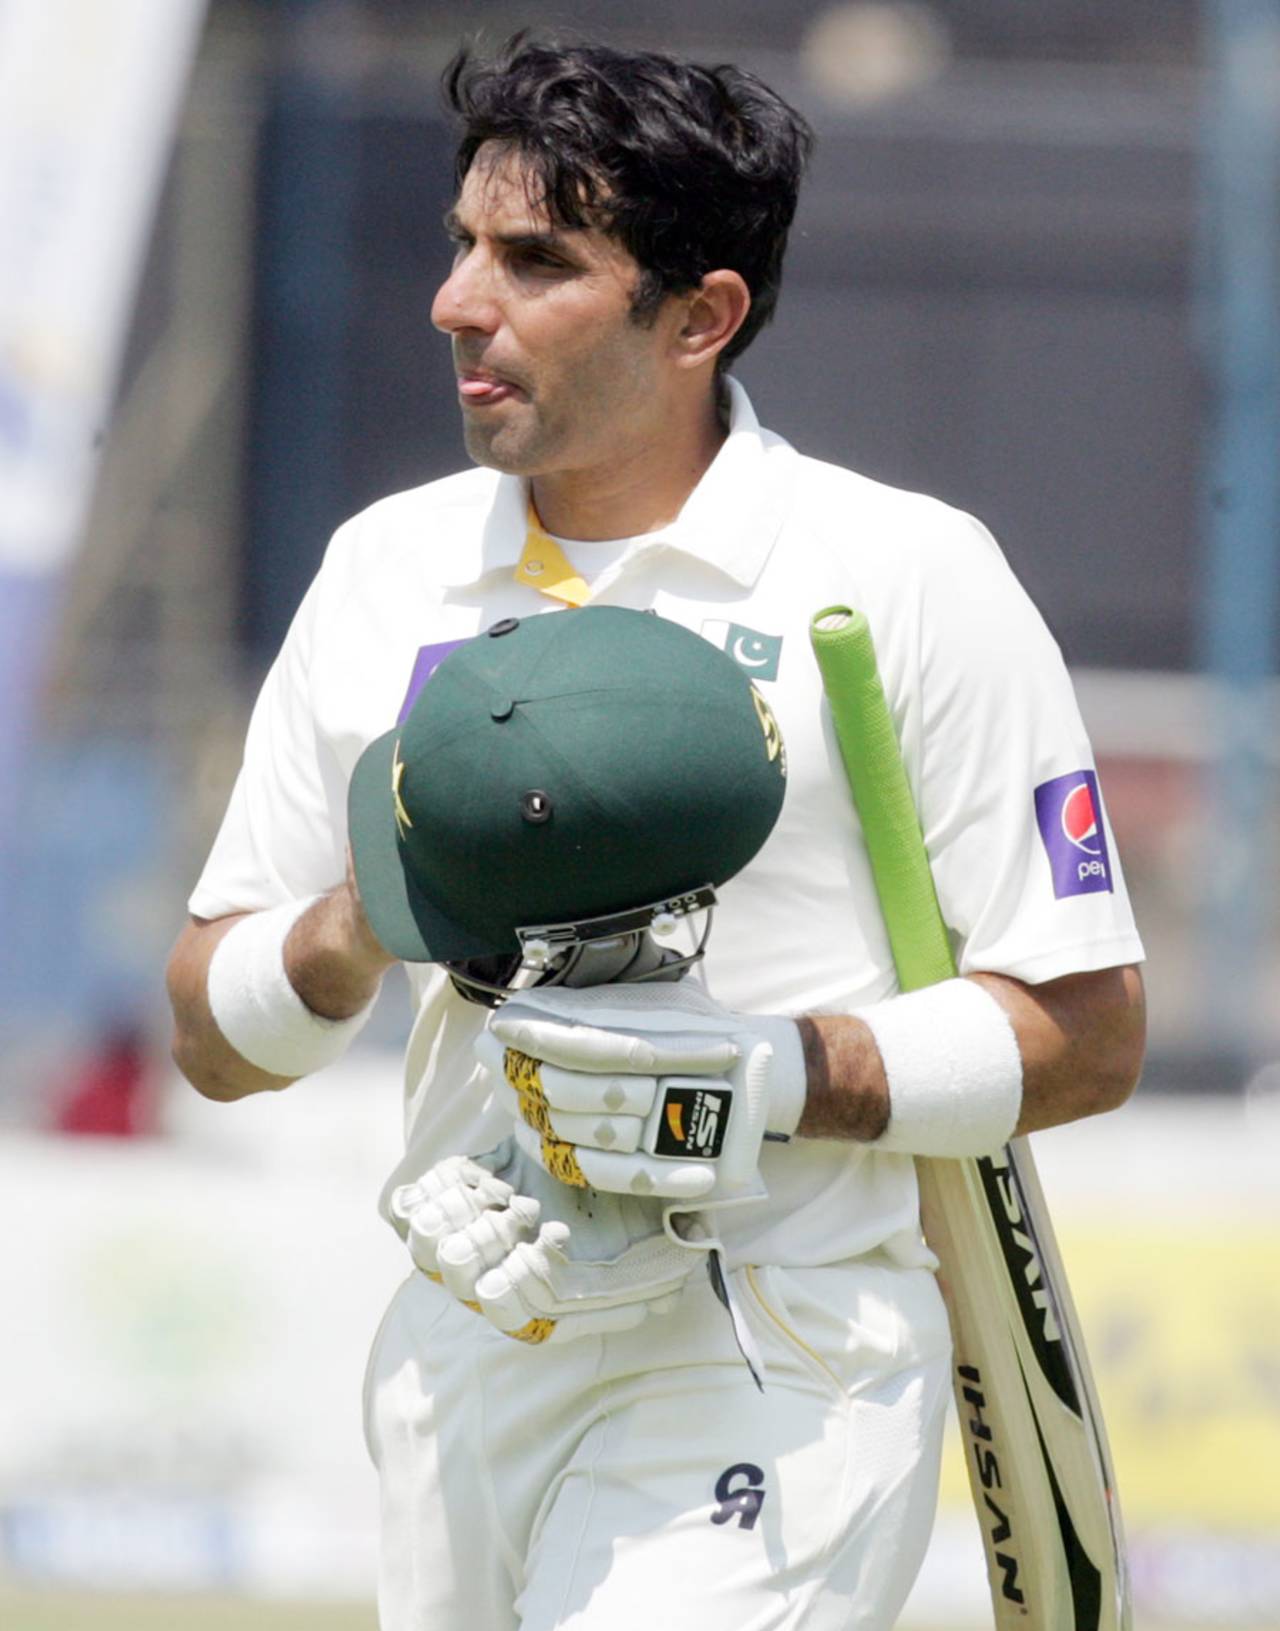 Misbah-ul-Haq was left unbeaten on 79, Zimbabwe v Pakistan, 2nd Test, Harare, 5th day, September 14, 2013